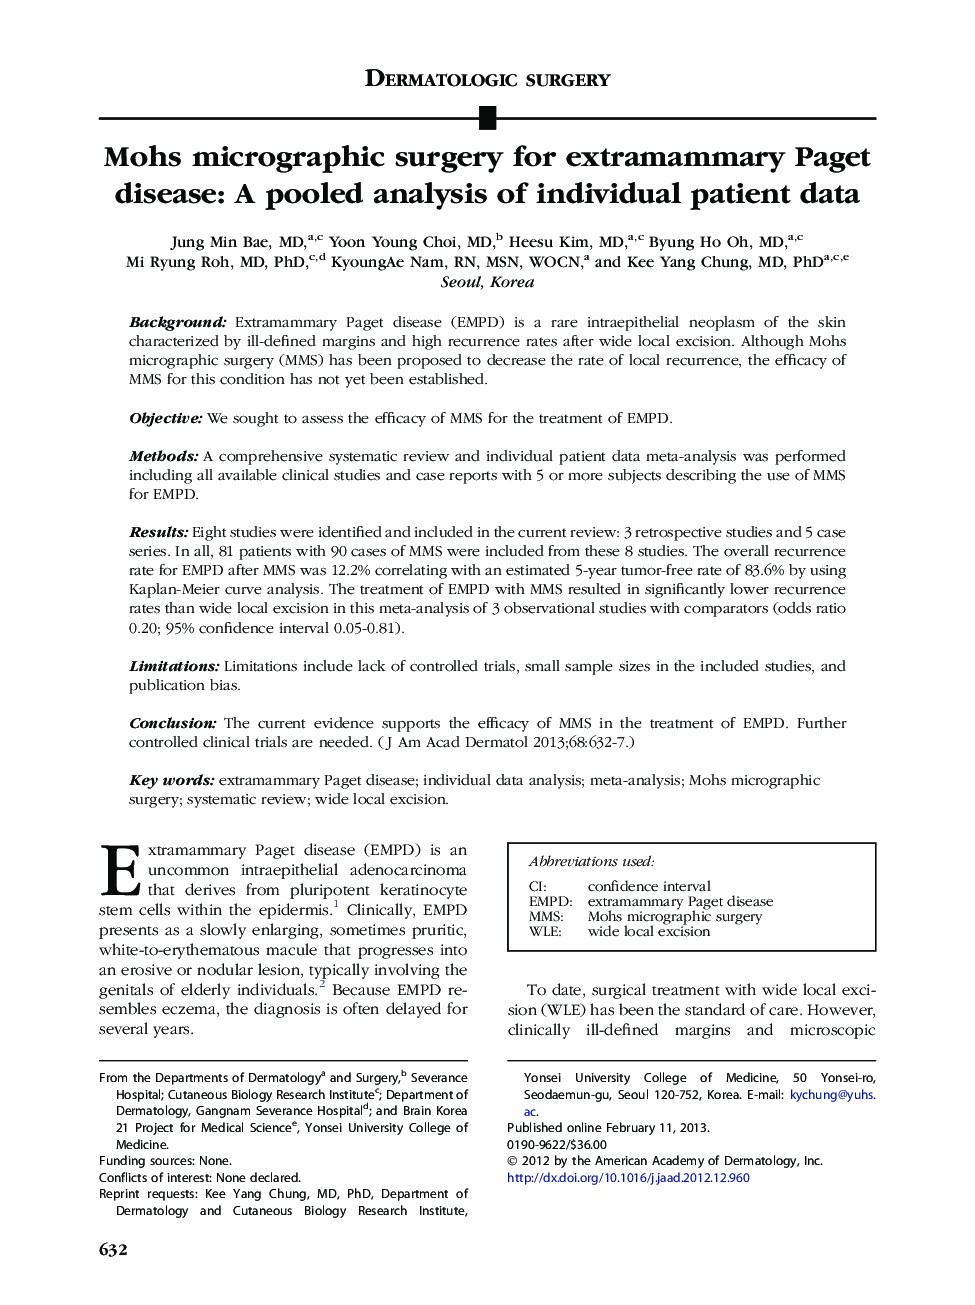 Mohs micrographic surgery for extramammary Paget disease: A pooled analysis of individual patient data 